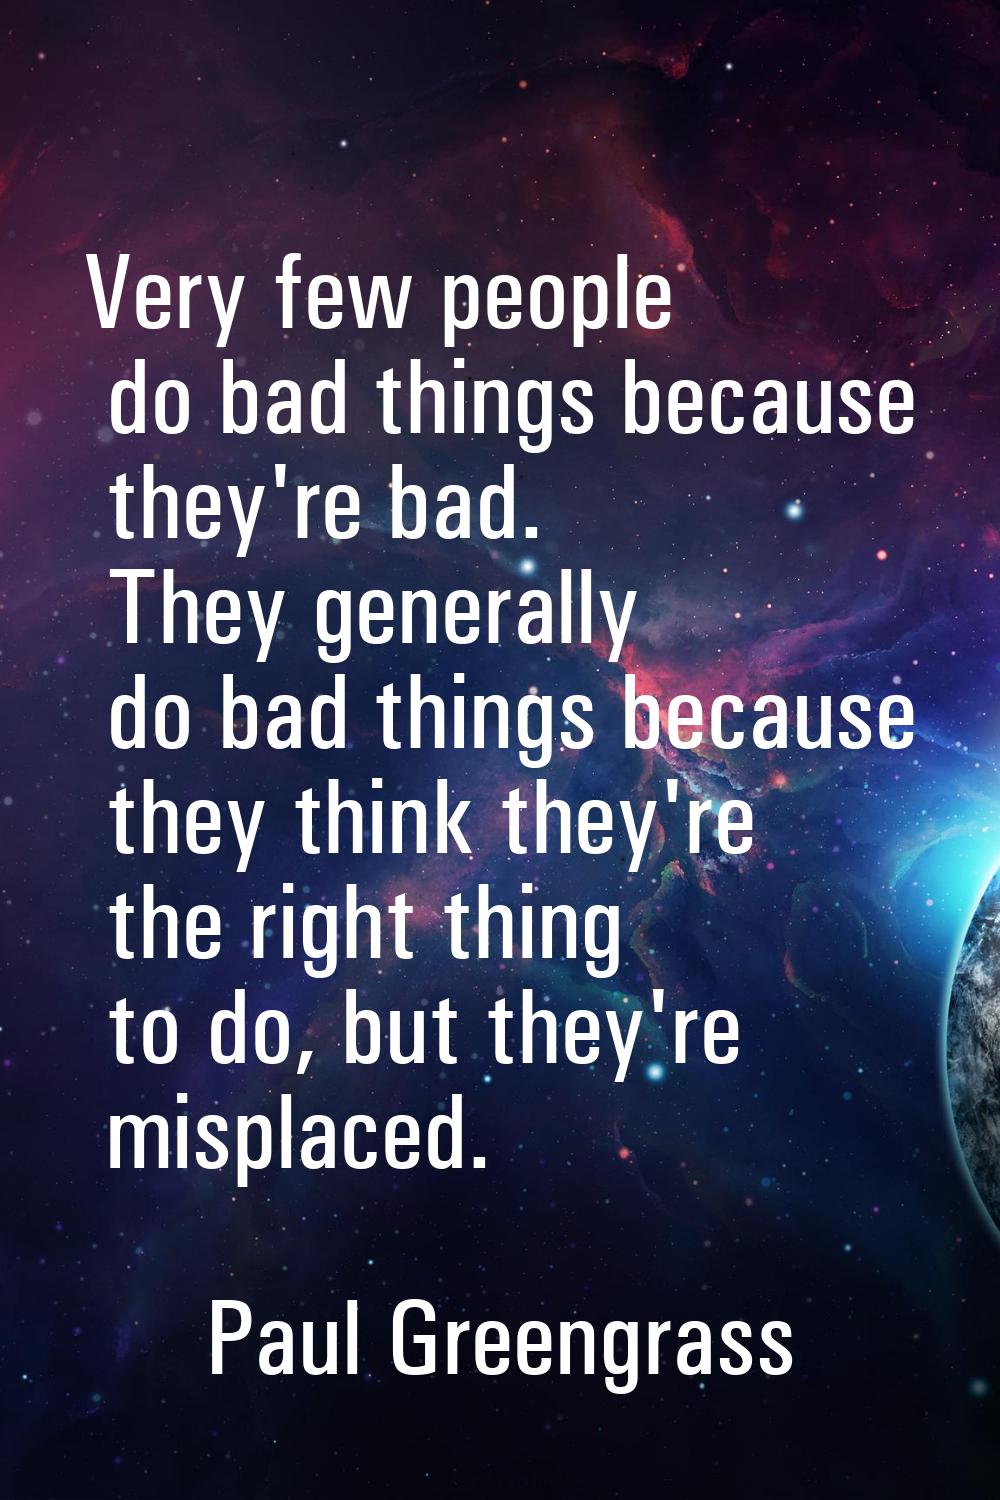 Very few people do bad things because they're bad. They generally do bad things because they think 